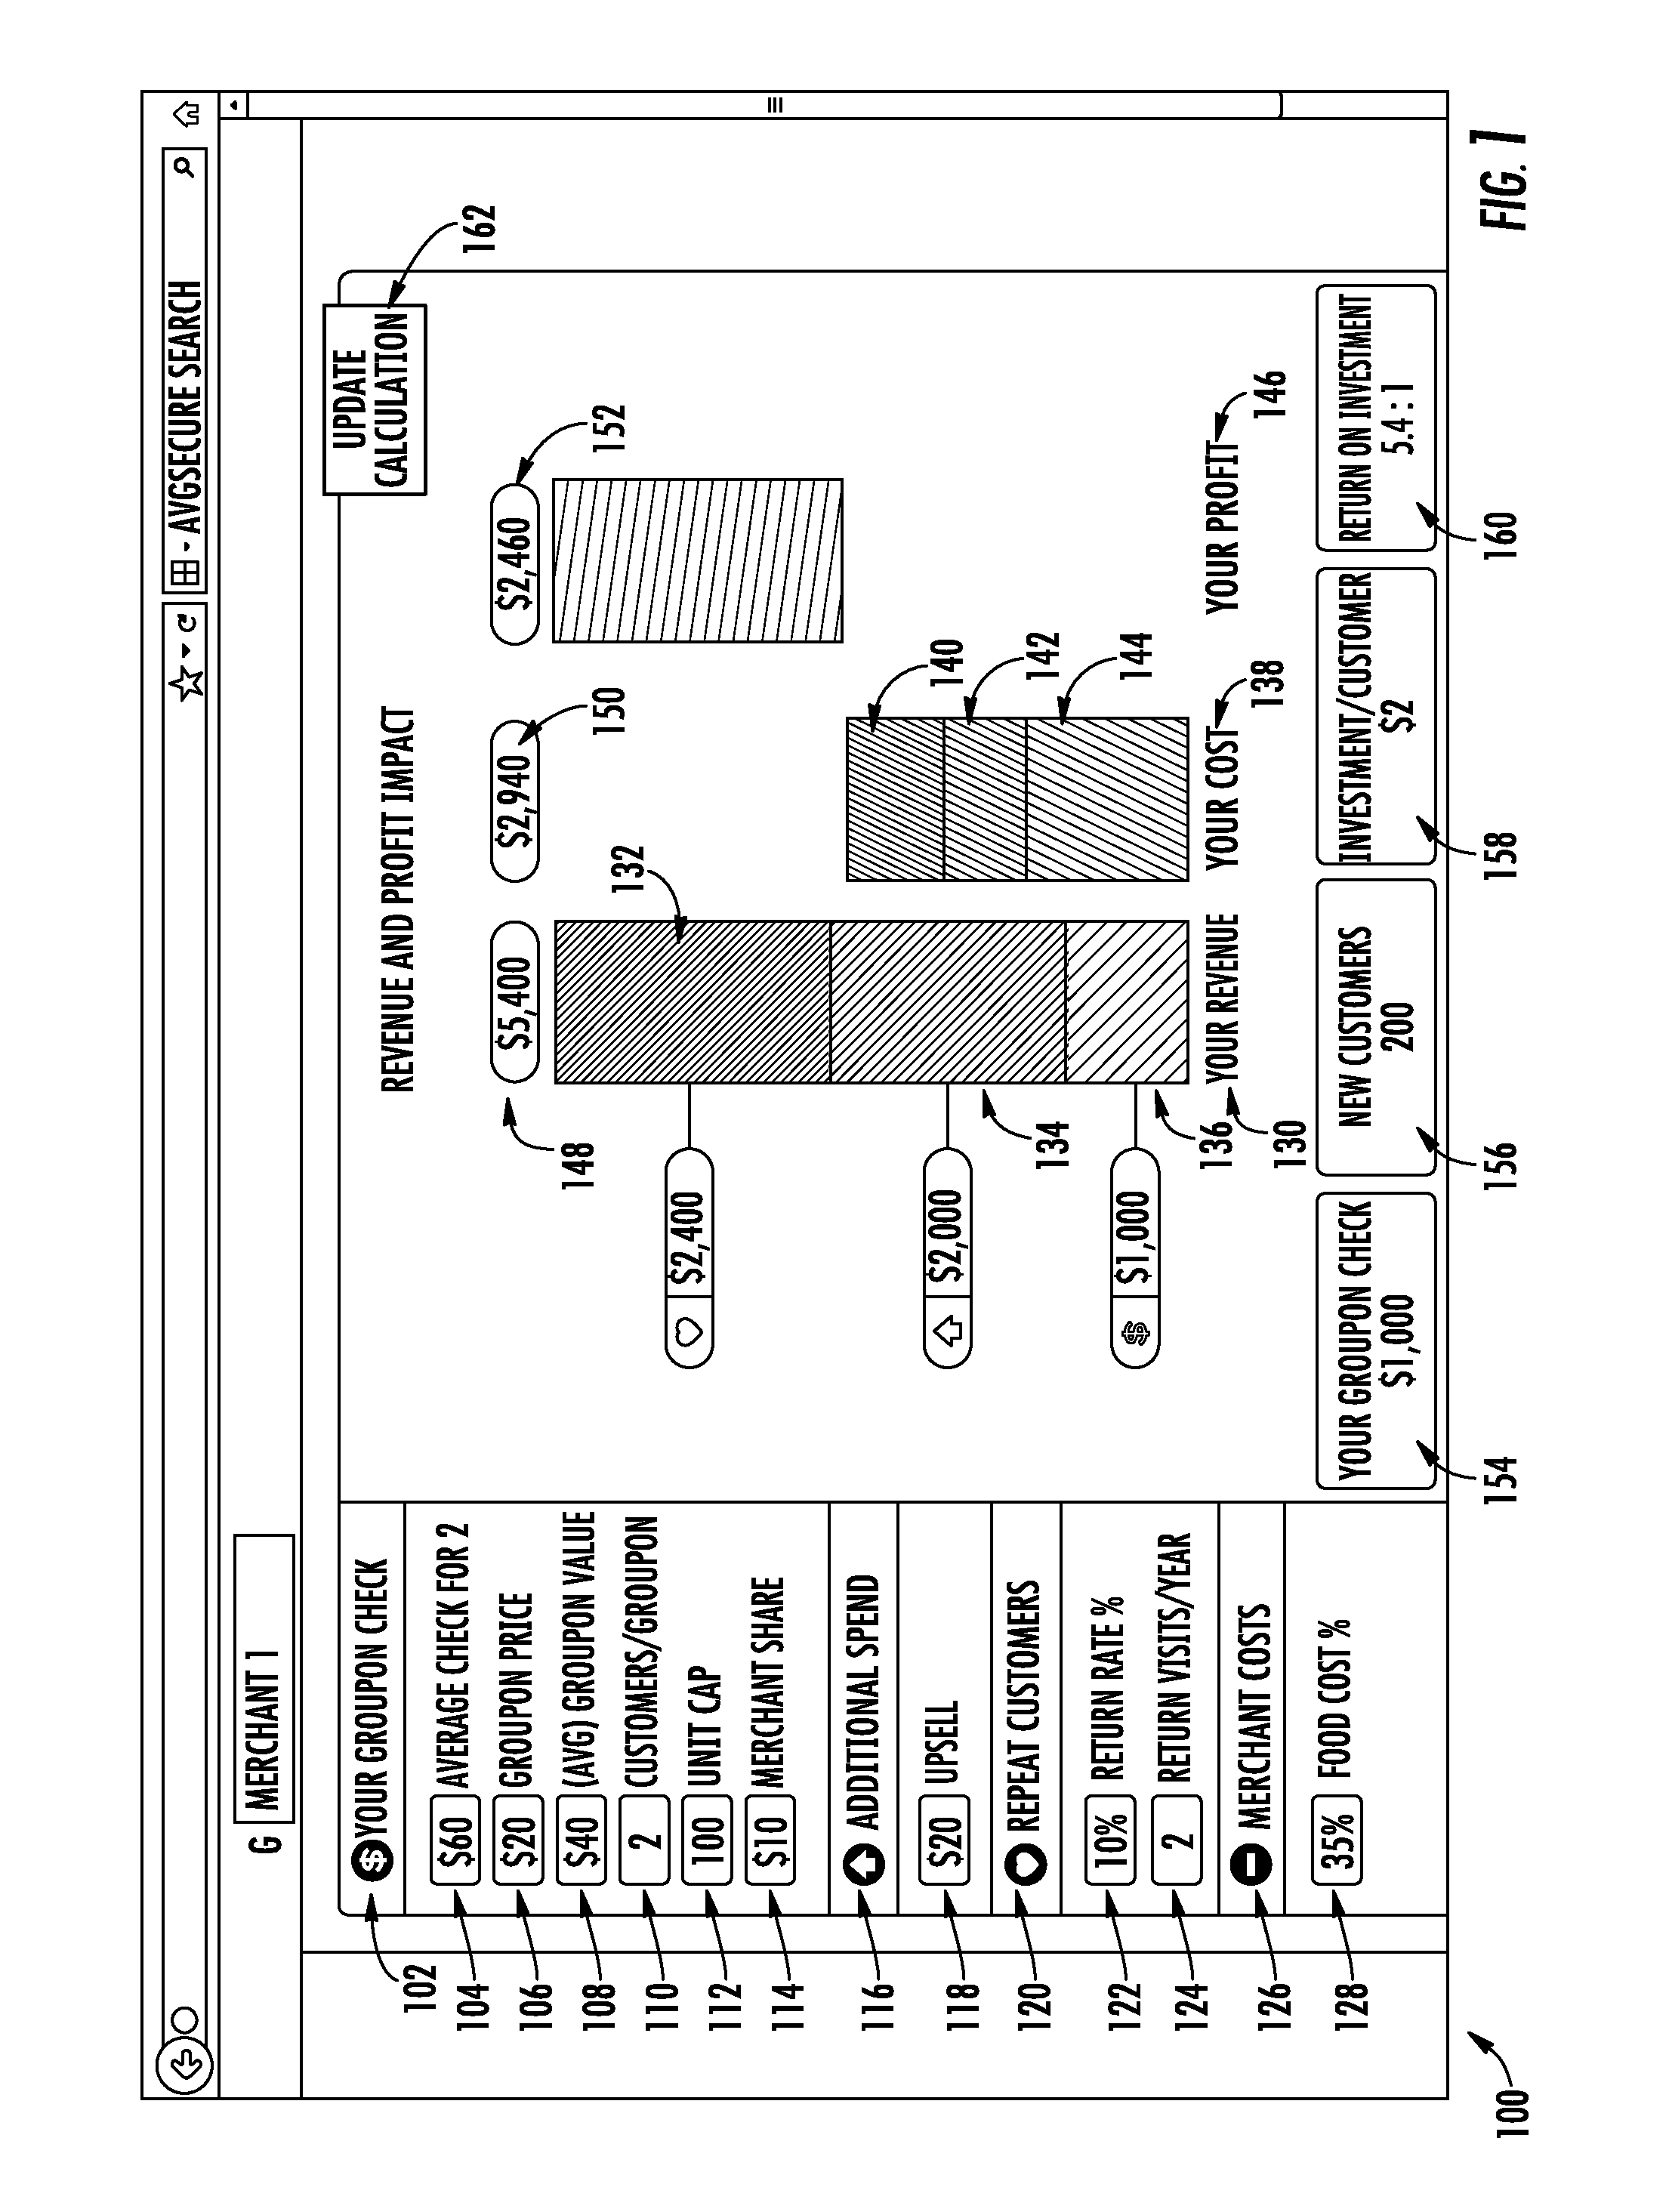 Method And Apparatus For Payment, Return On Investment, And Impact Reporting